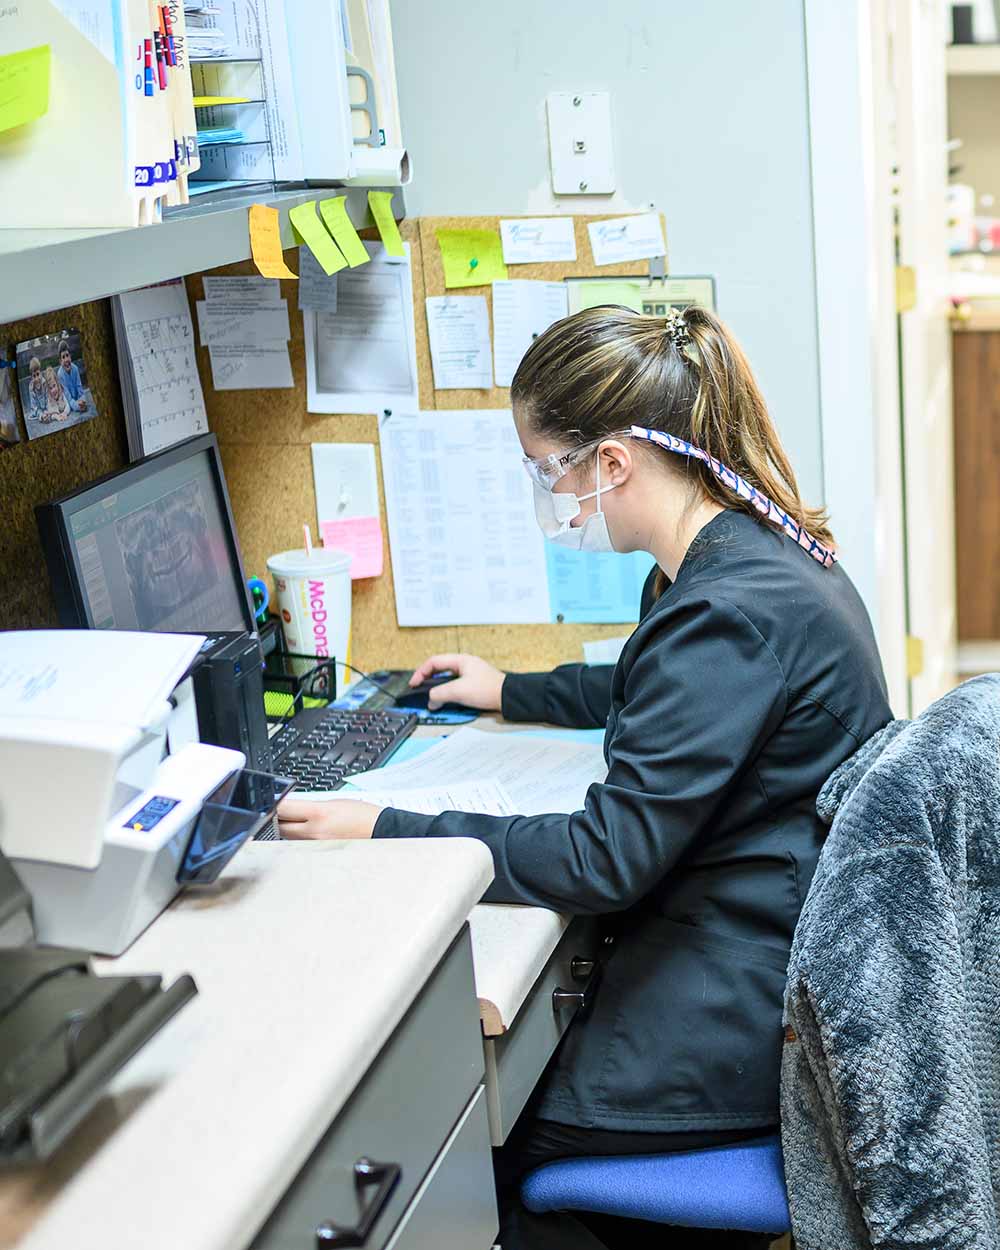 A LaGrange Oral Surgery and Implant Center staff member works on patient paperwork.